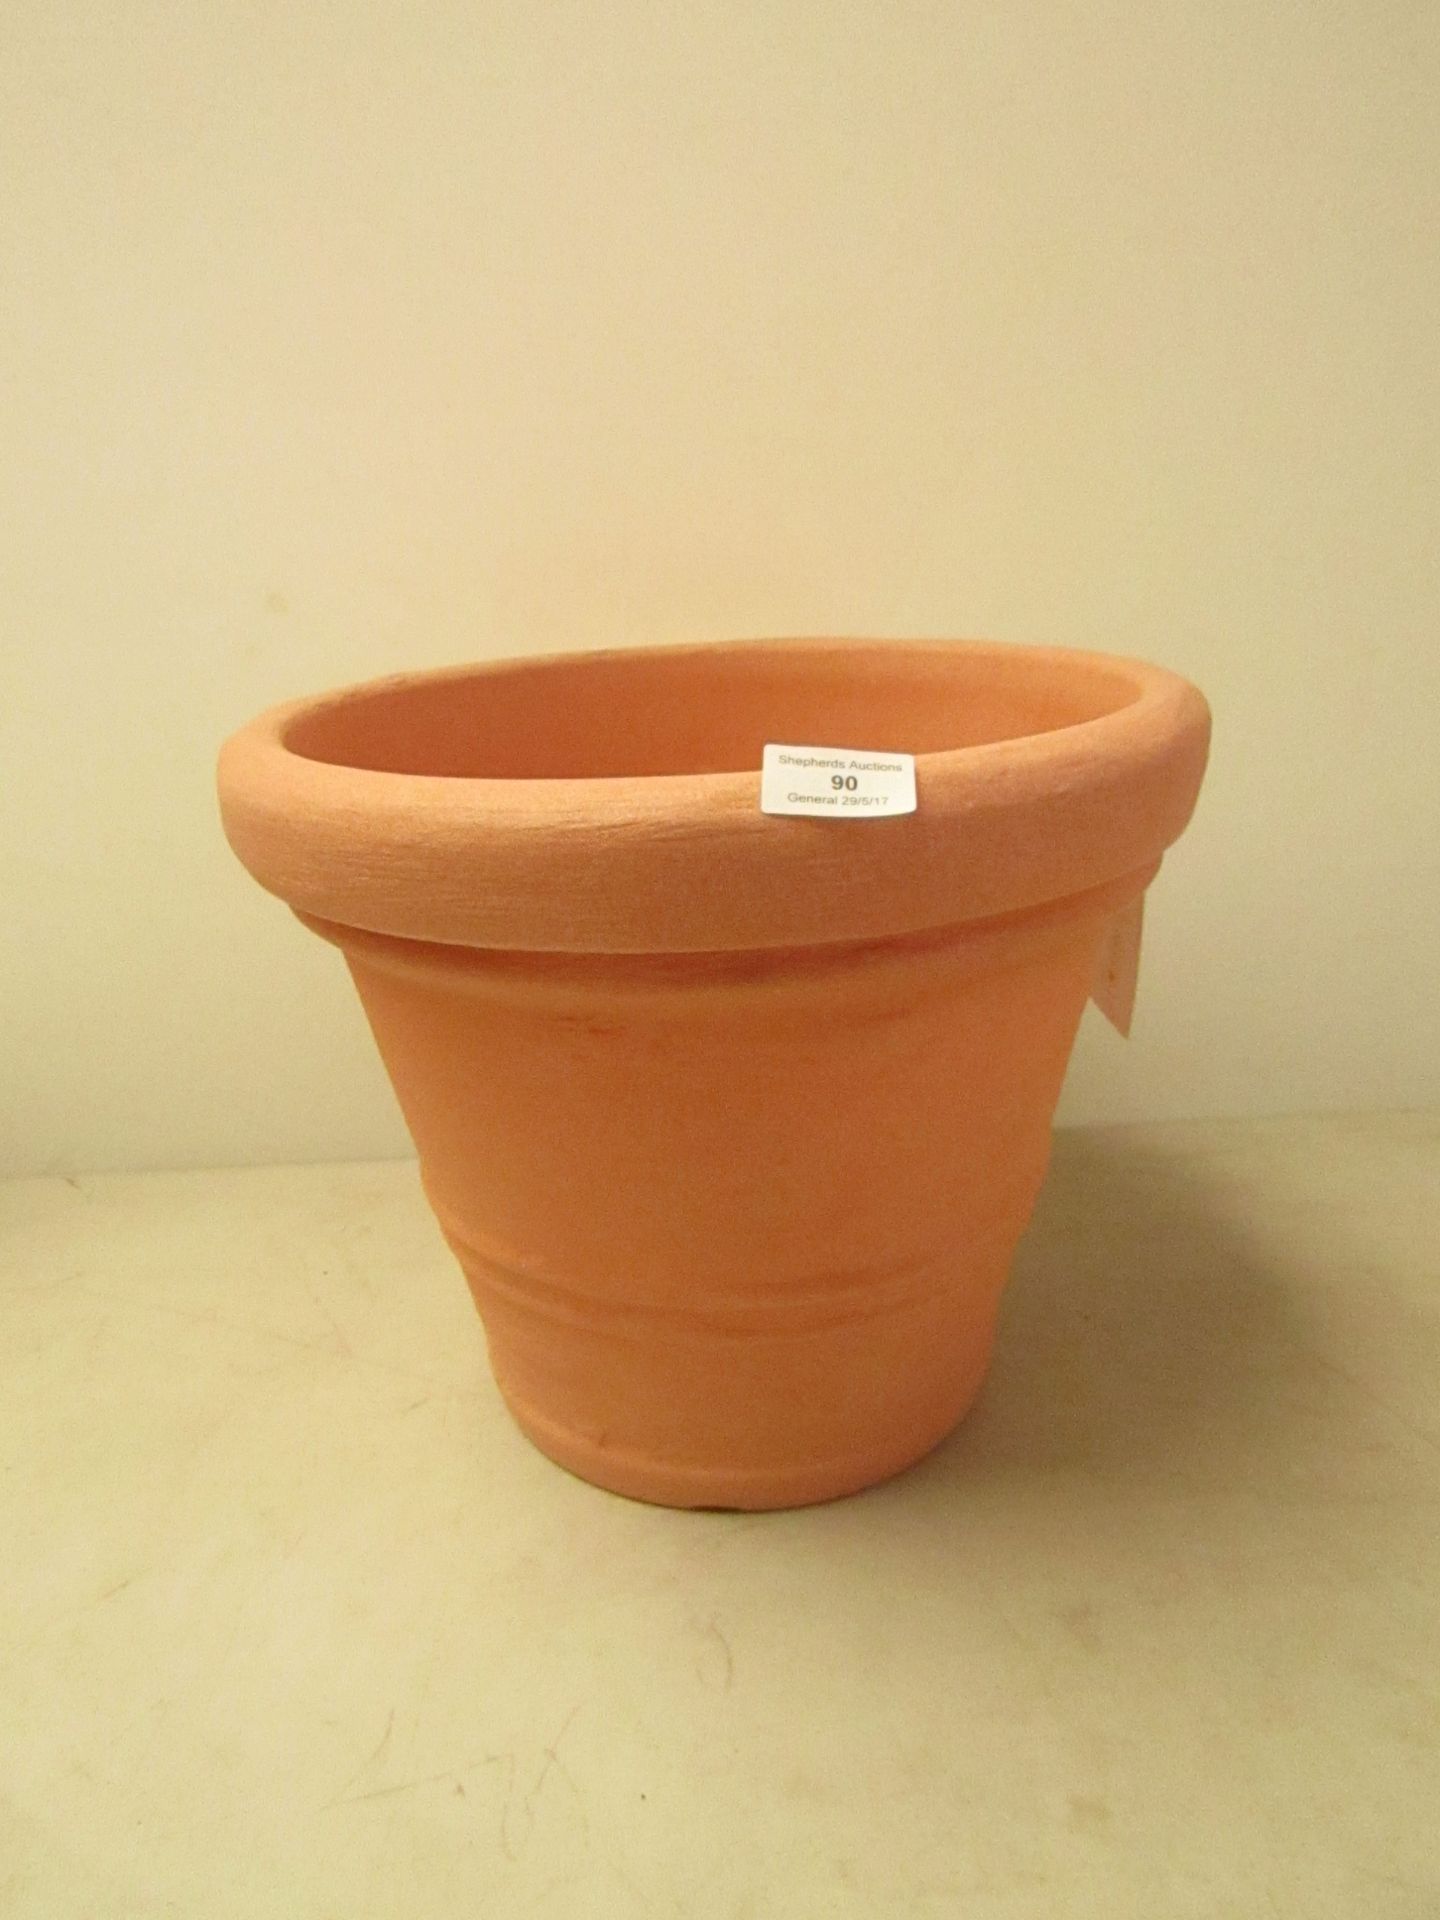 Scheurich plant pot, plastic, with tags.